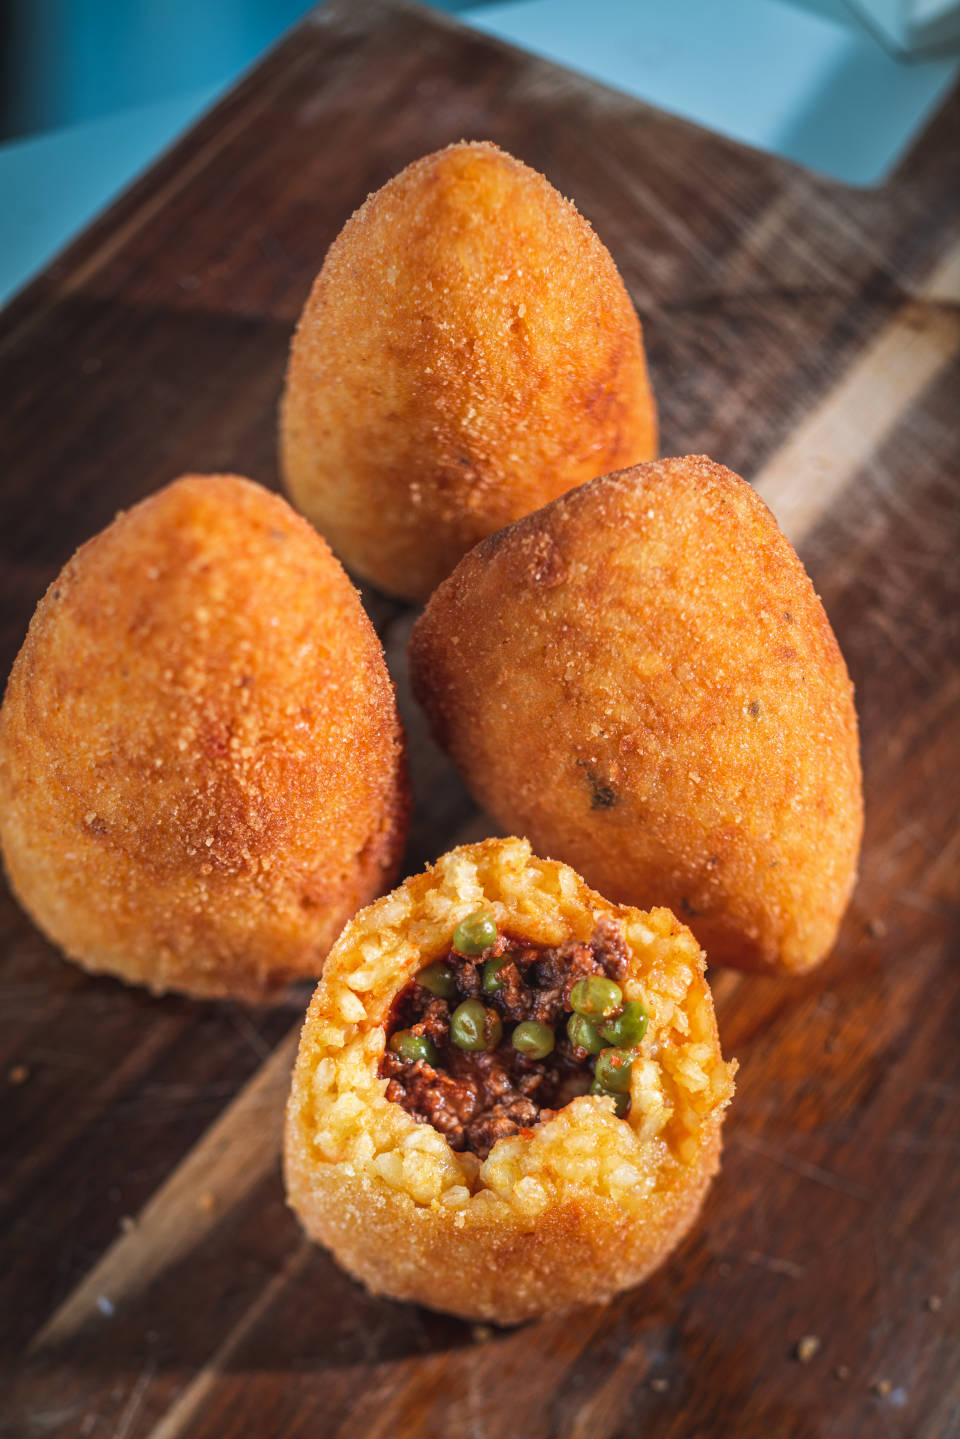 Delicious home made rice balls  from Sicily, called Arancine